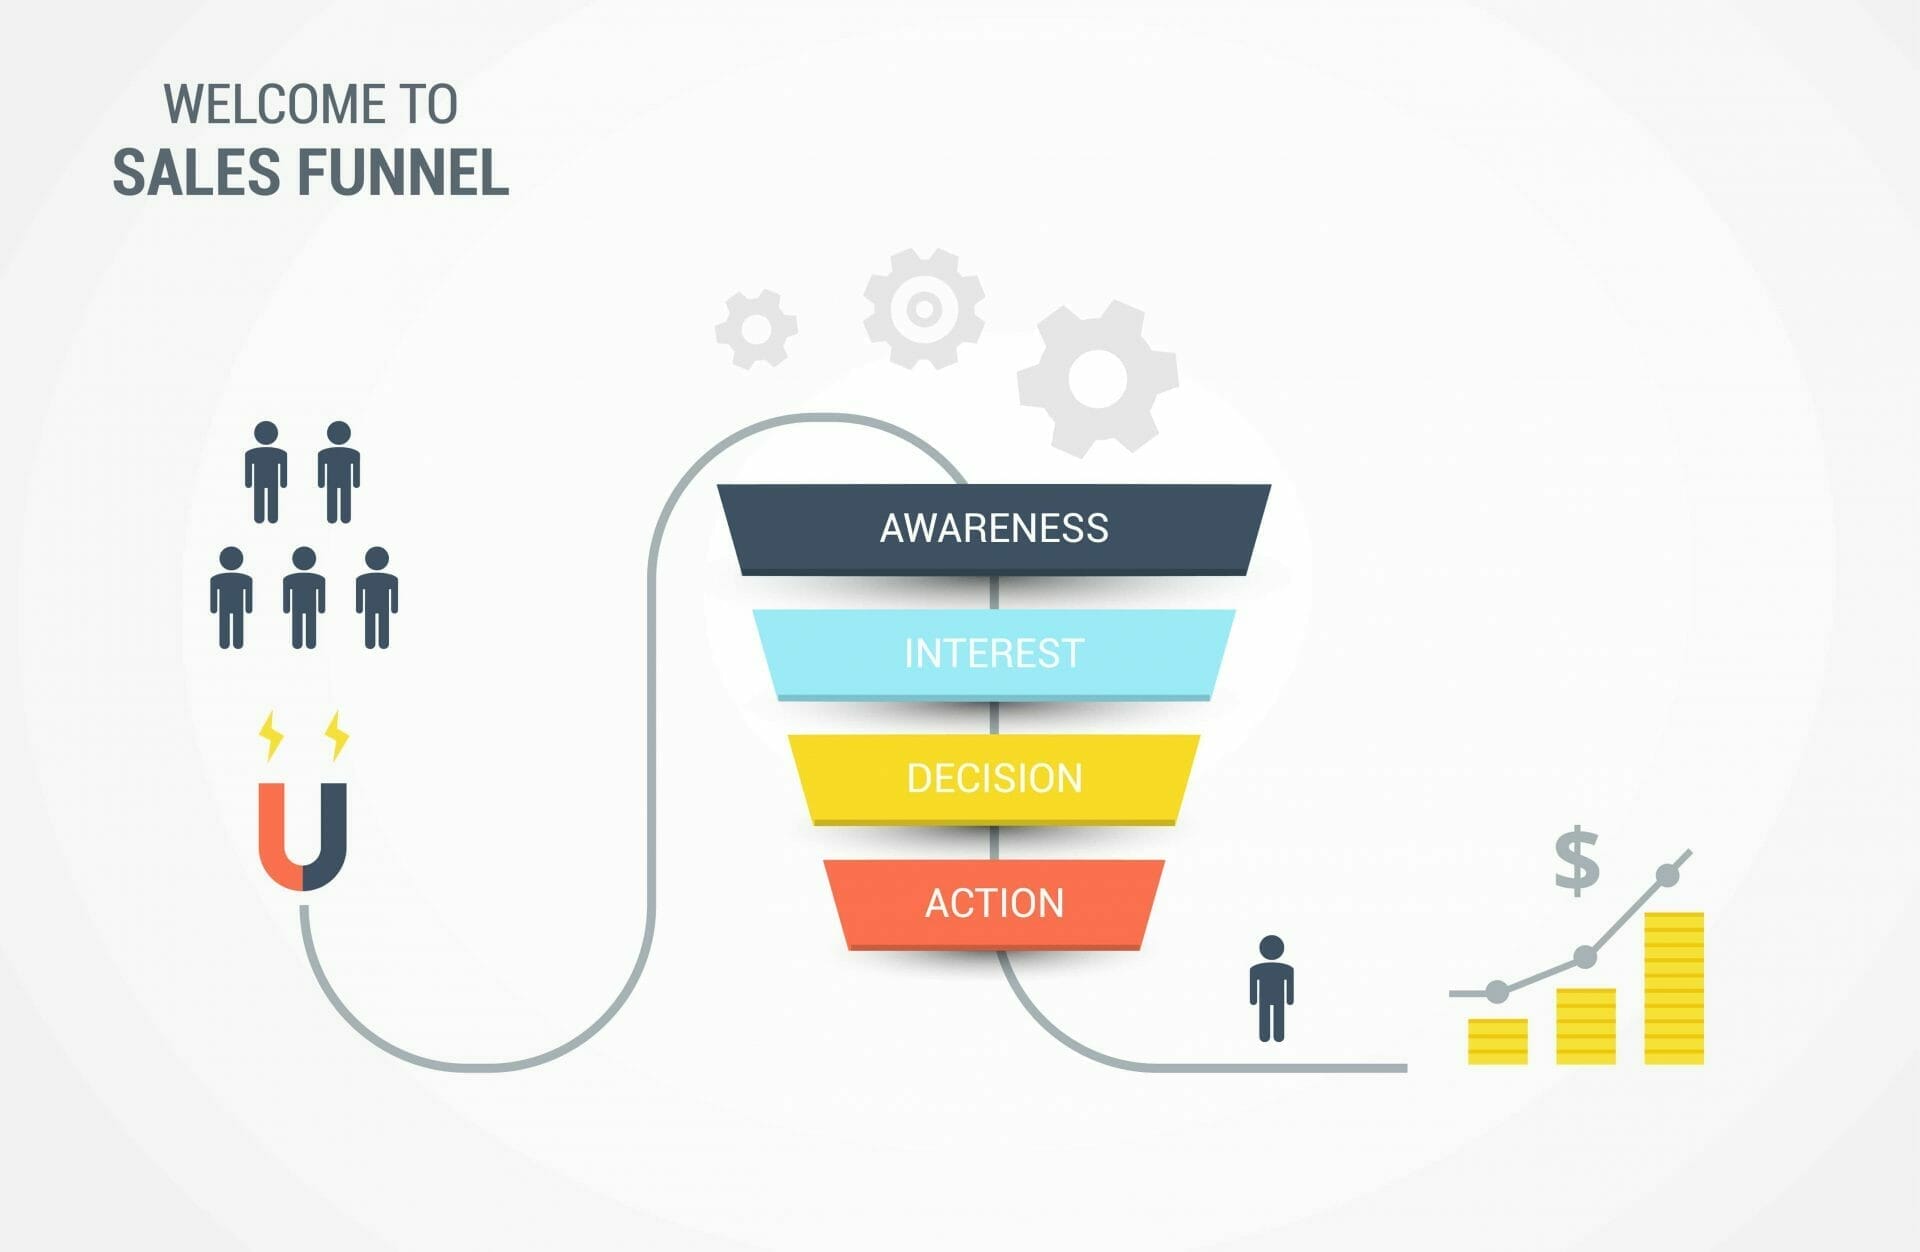 Website Sales Funnel Implementation For My Business- GUIDE